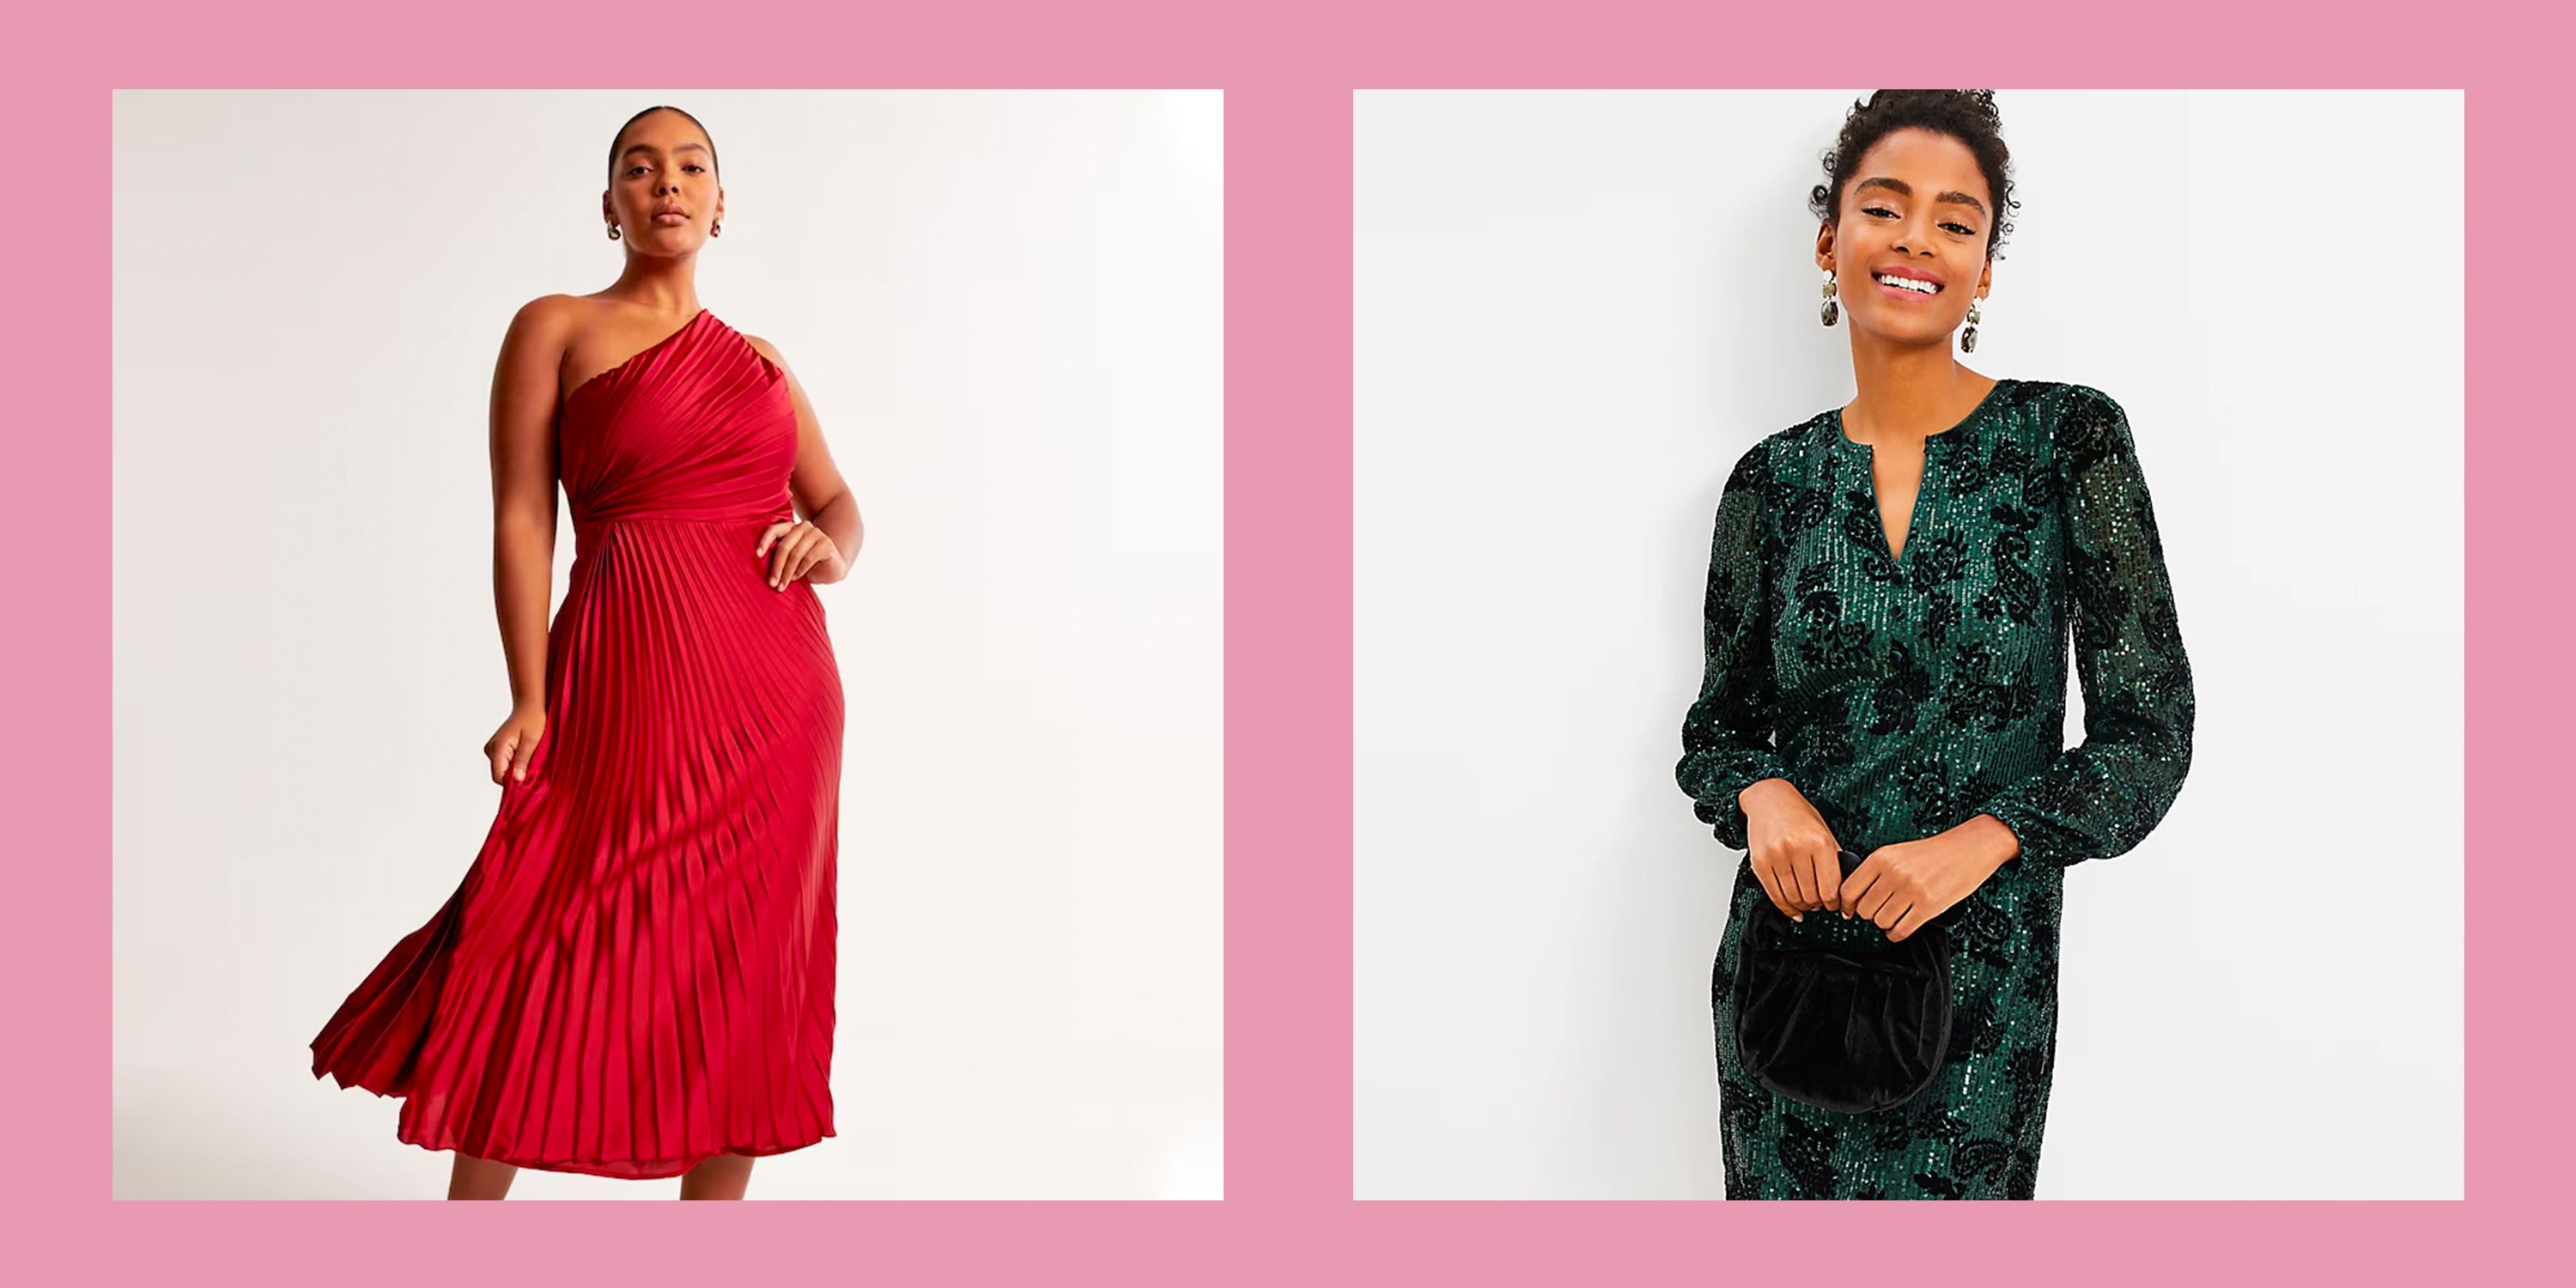 45 Winter Wedding Guest Dresses You Can Wear This Season